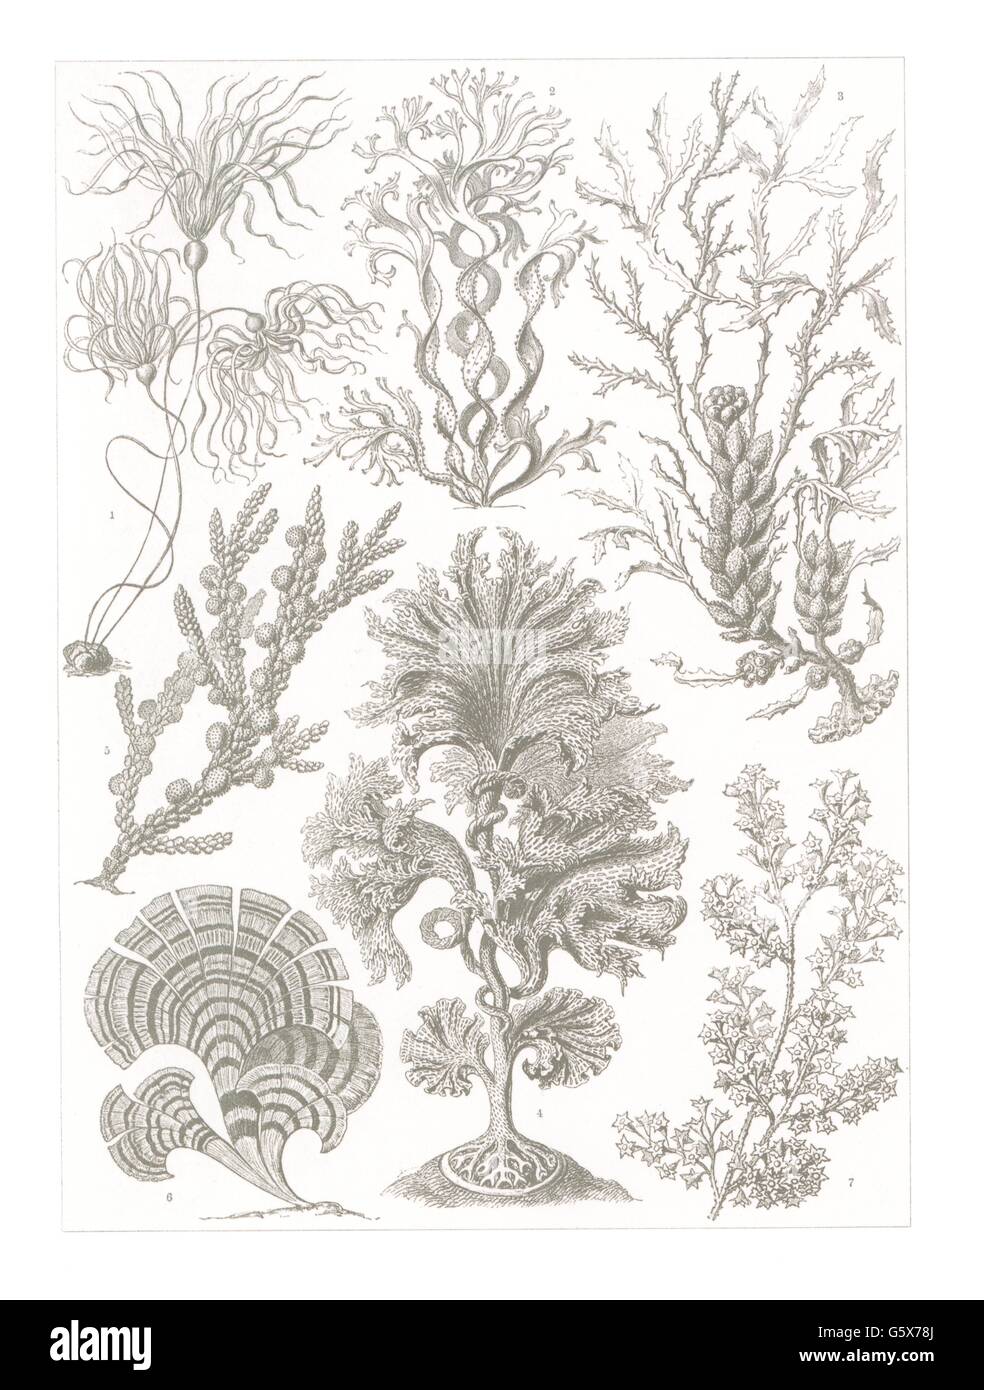 botany, brown algae (Fucacae), colour lithograph, out of: Ernst Haeckel, 'Kunstformen der Natur', Leipzig - Vienna, 1899 - 1904, Additional-Rights-Clearences-Not Available Stock Photo